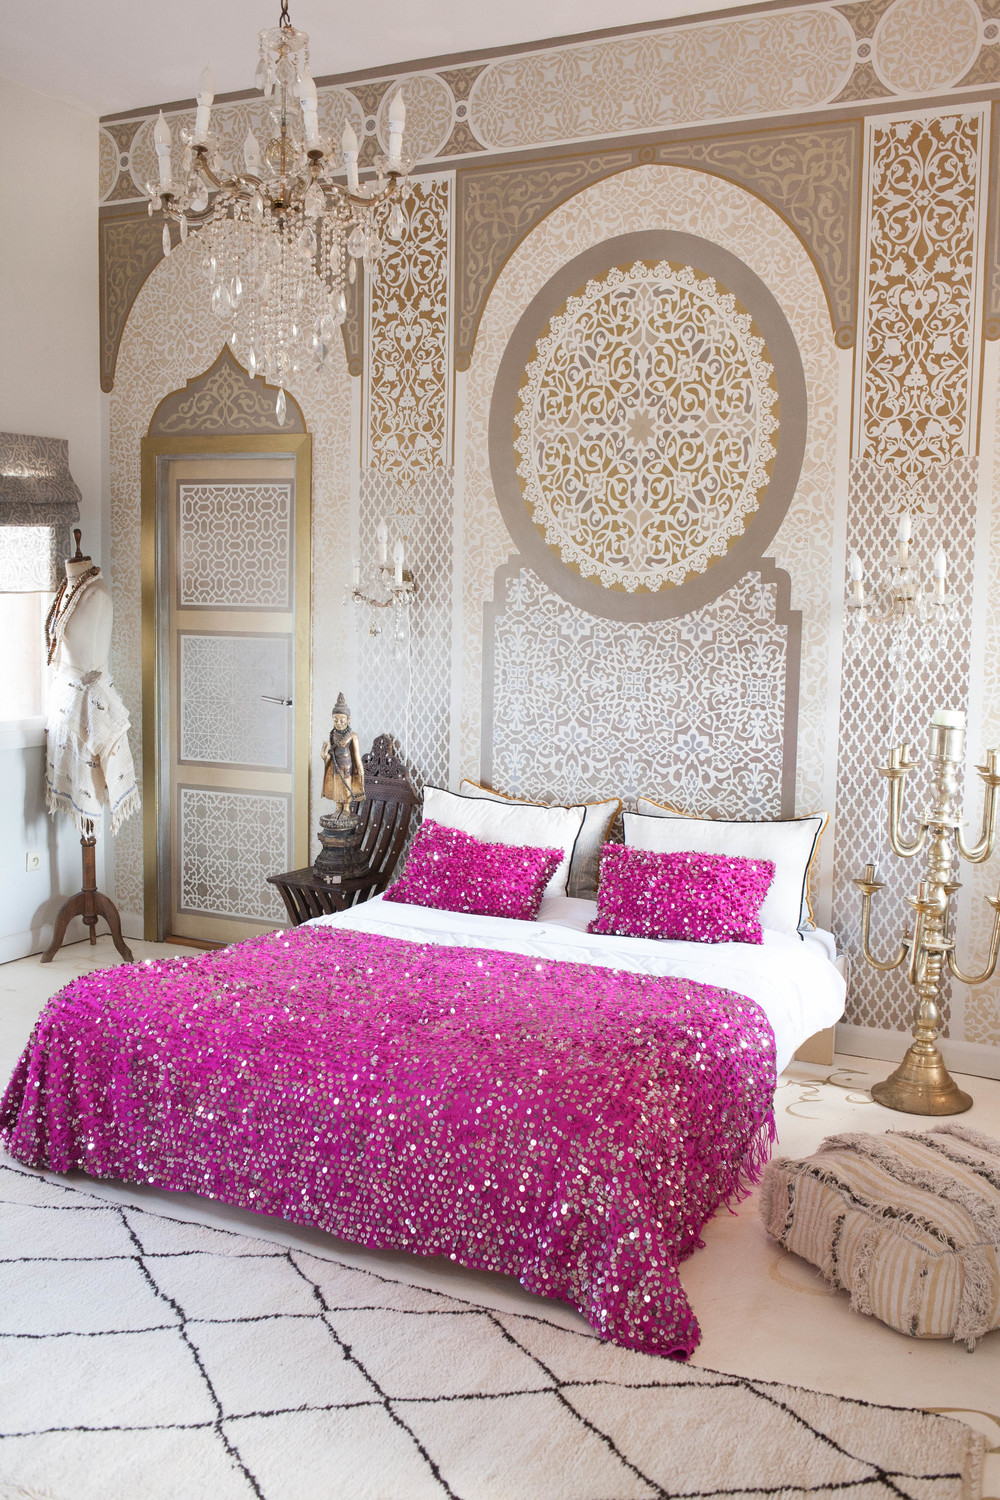  Moroccan Bedroom Style 